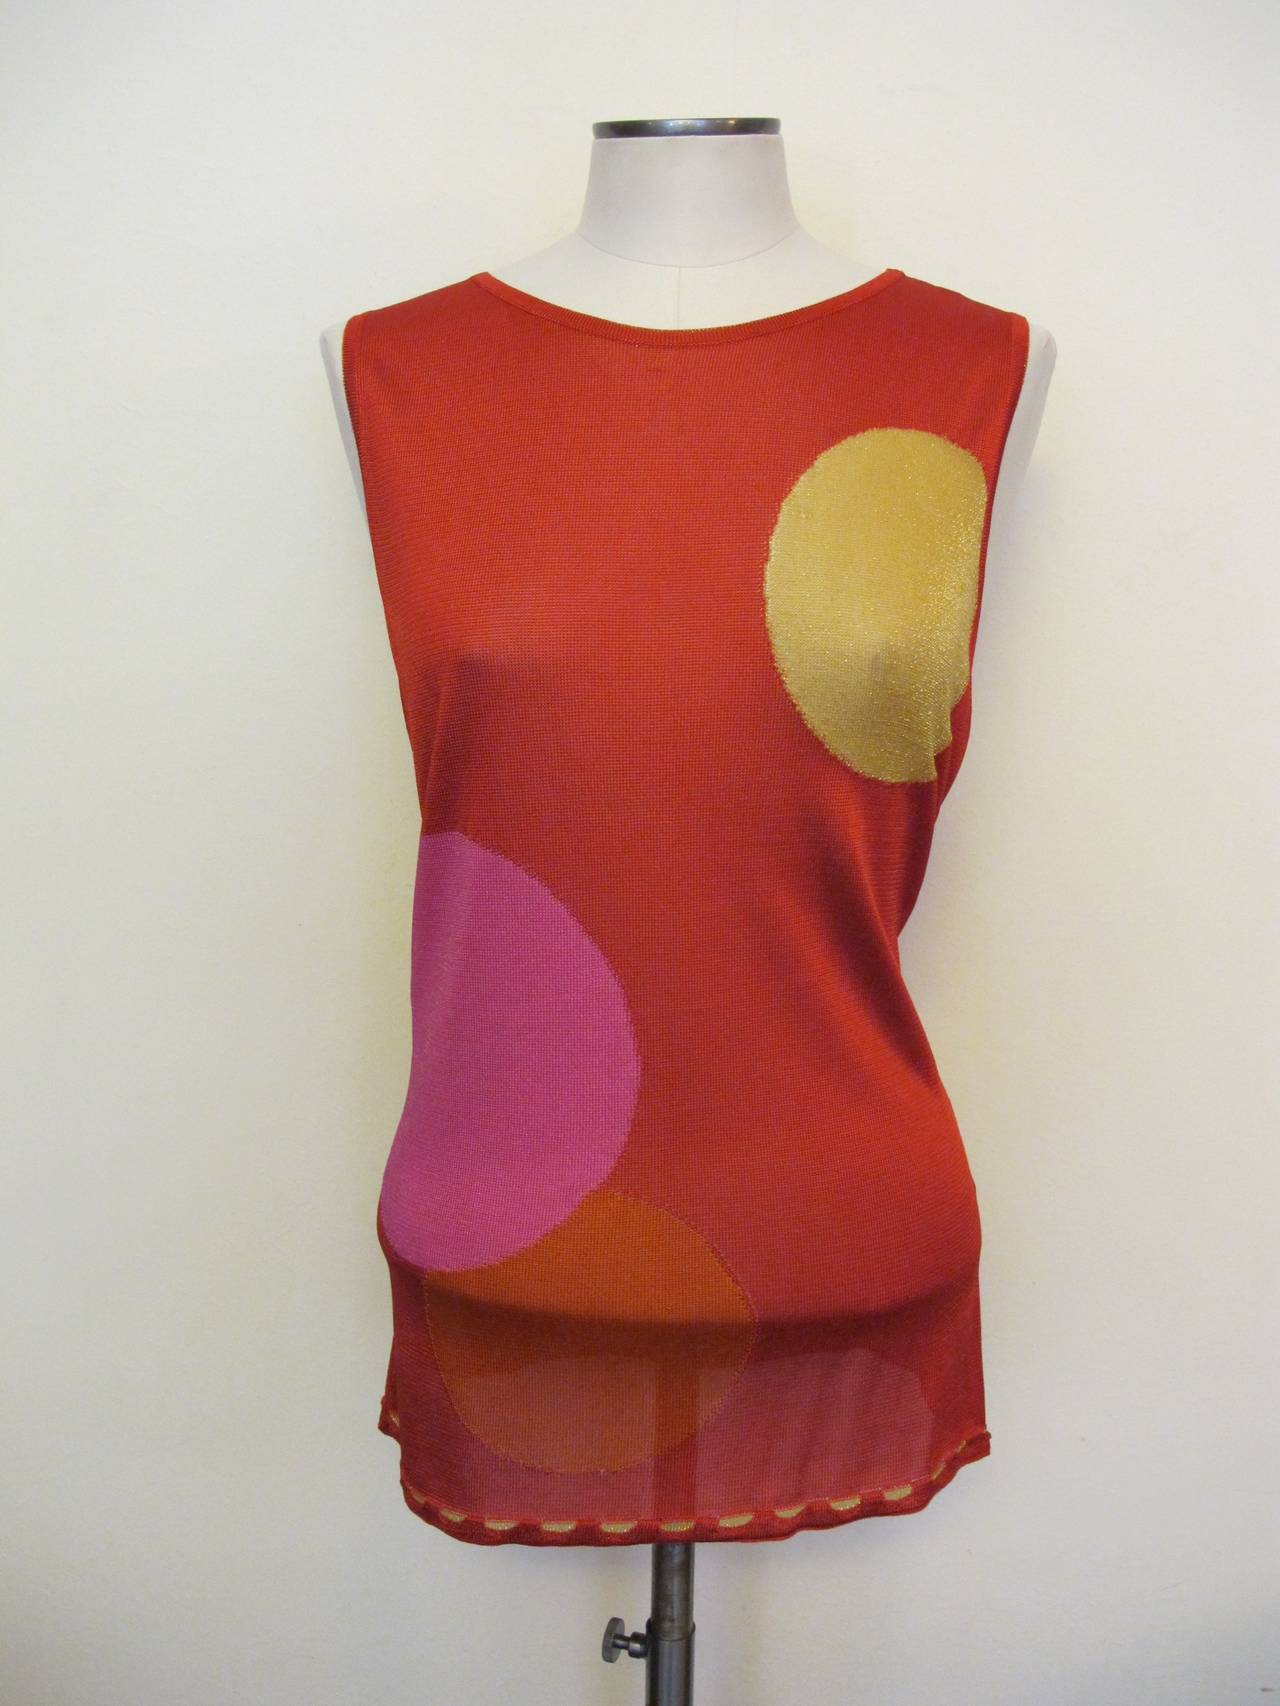 Silky viscose rayon and polyester knit tank with jewel neckline that is trimmed with a gold thread interior band as are the interior arm holes. The silky weave is a warm red with three spheres in shades of pink, orange and gold with shimmery gold